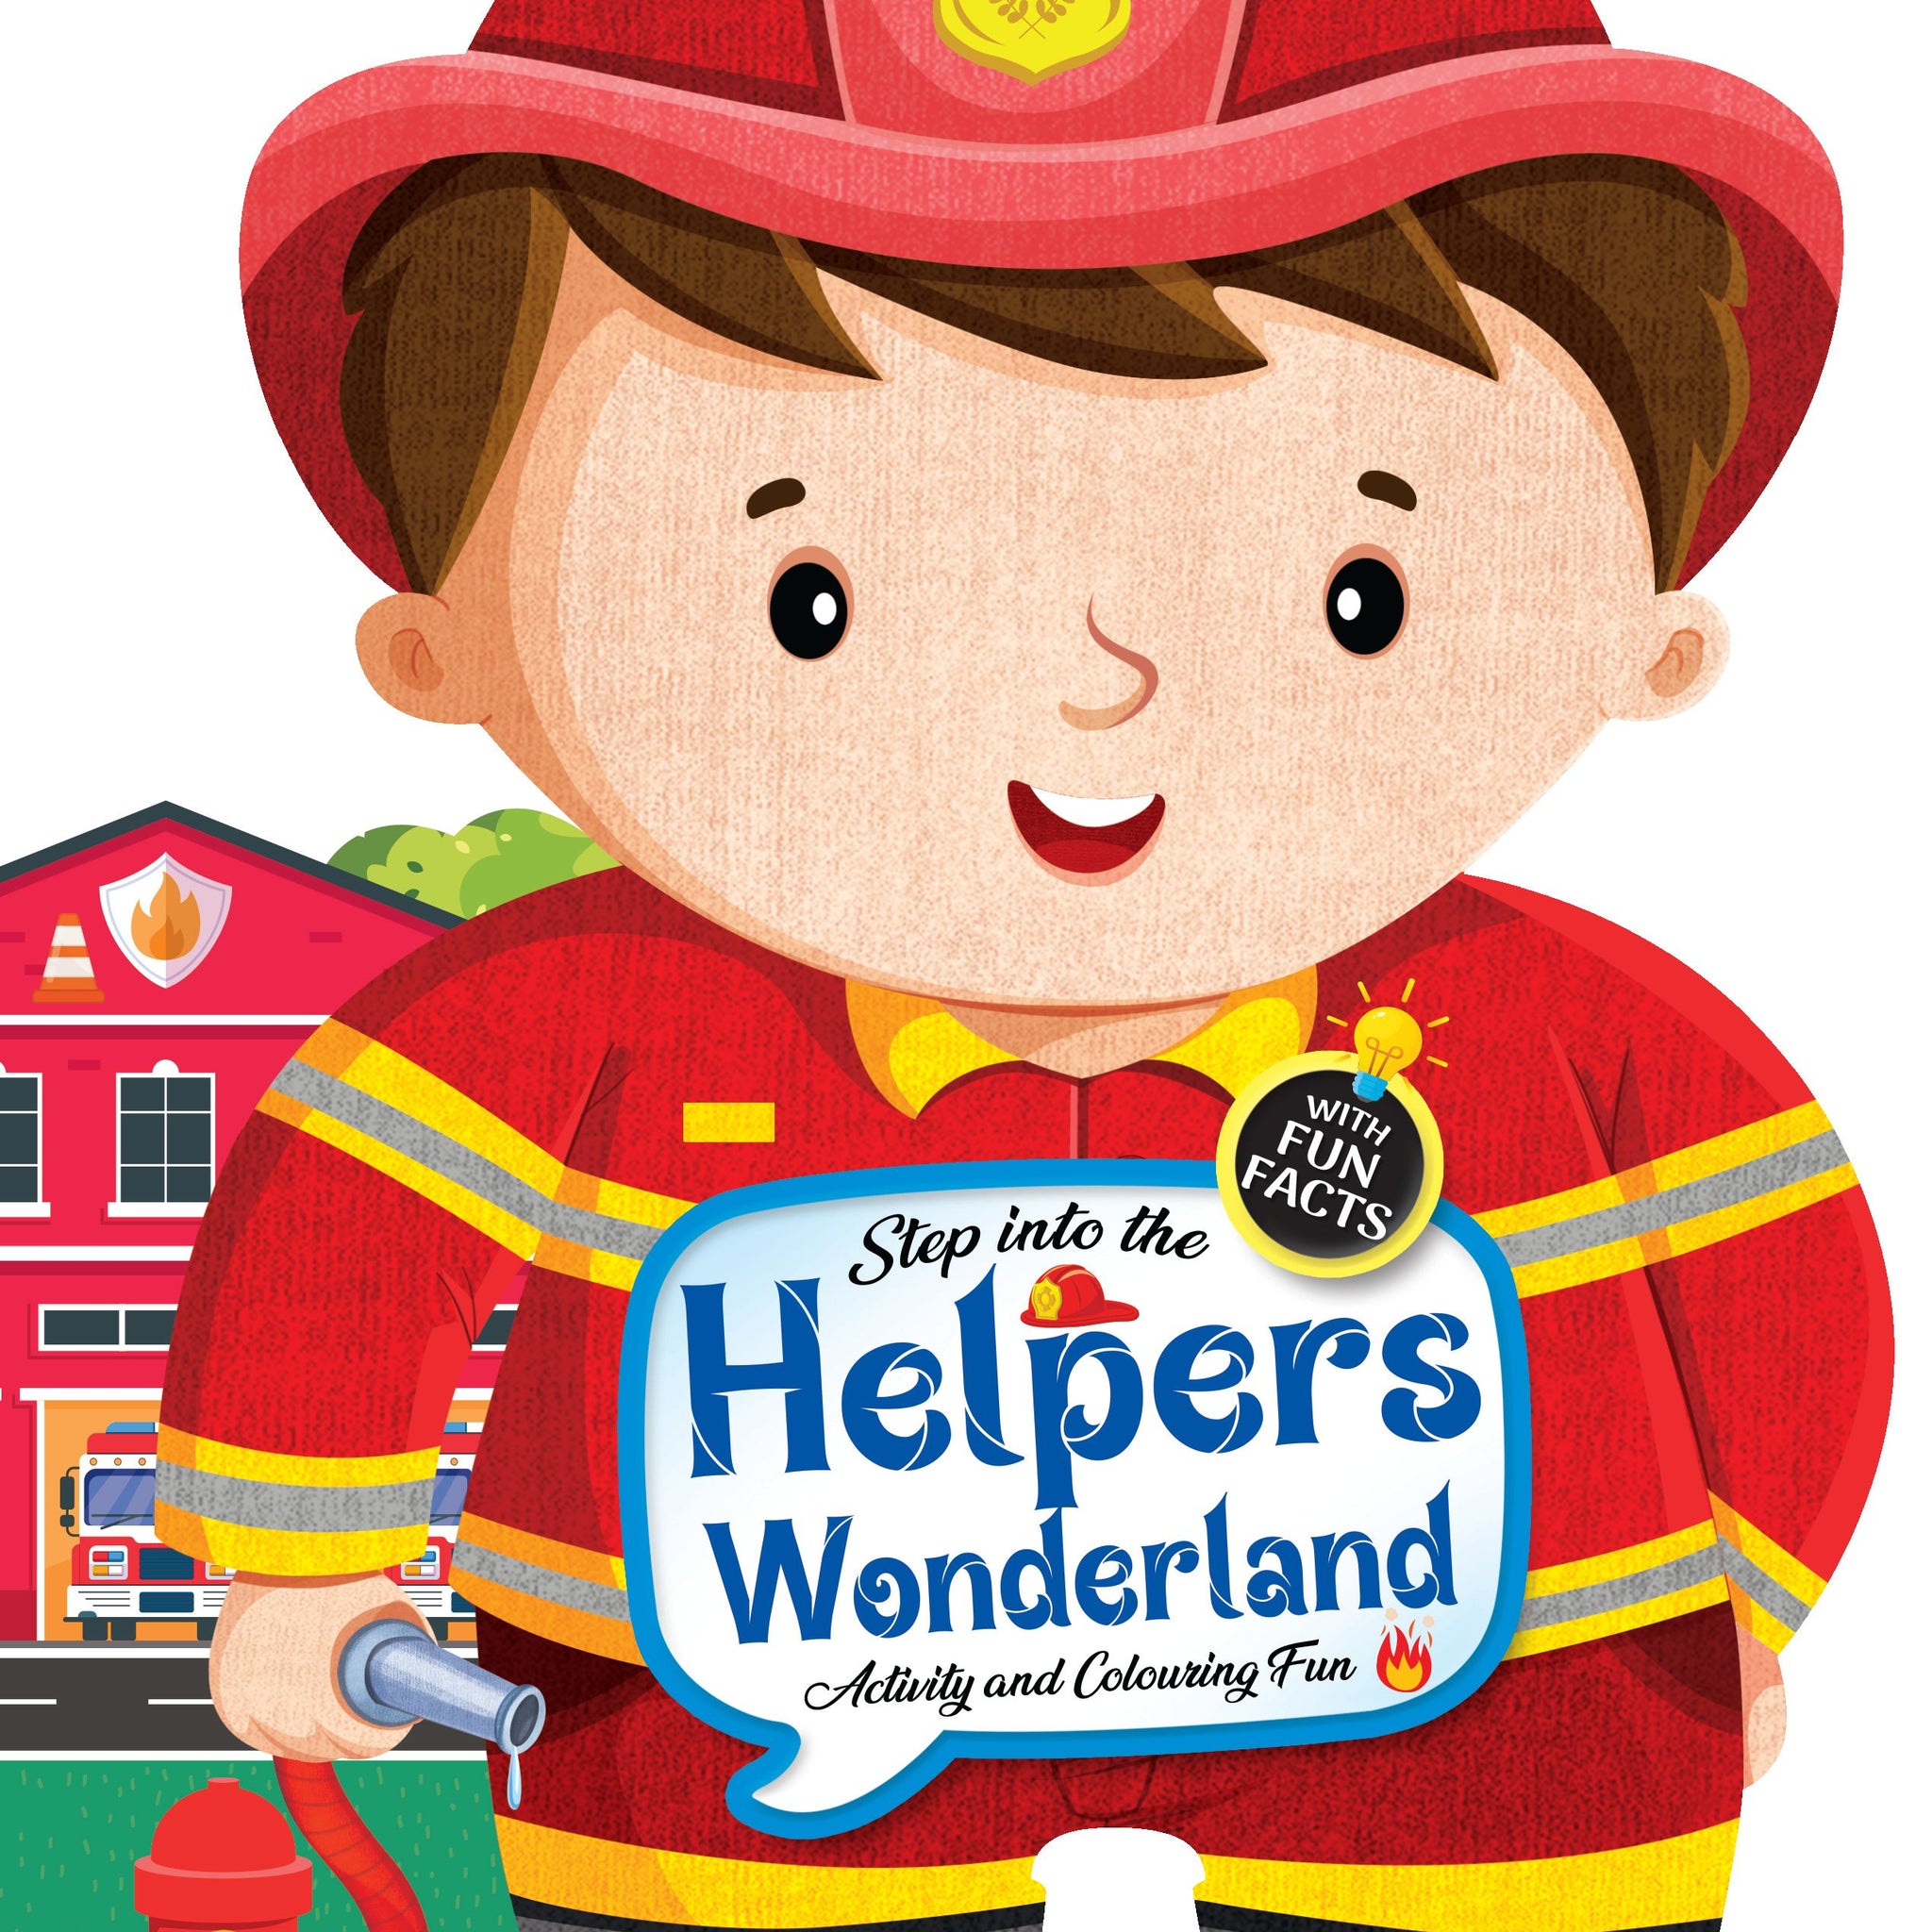 Step into the Helpers Wonderland - Activity and Colouring Fun Book for Age 4+